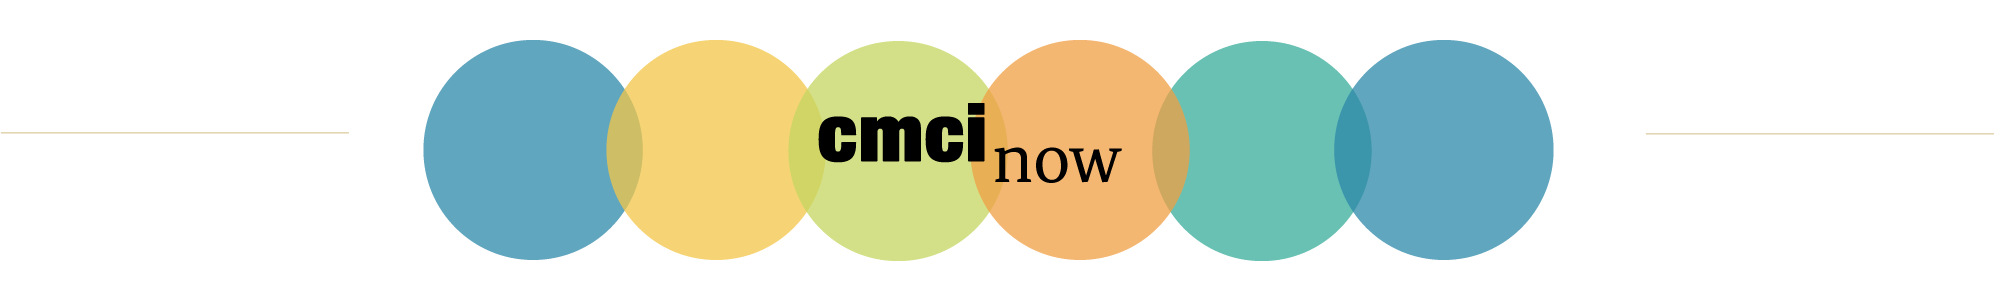 cmci now header with circles